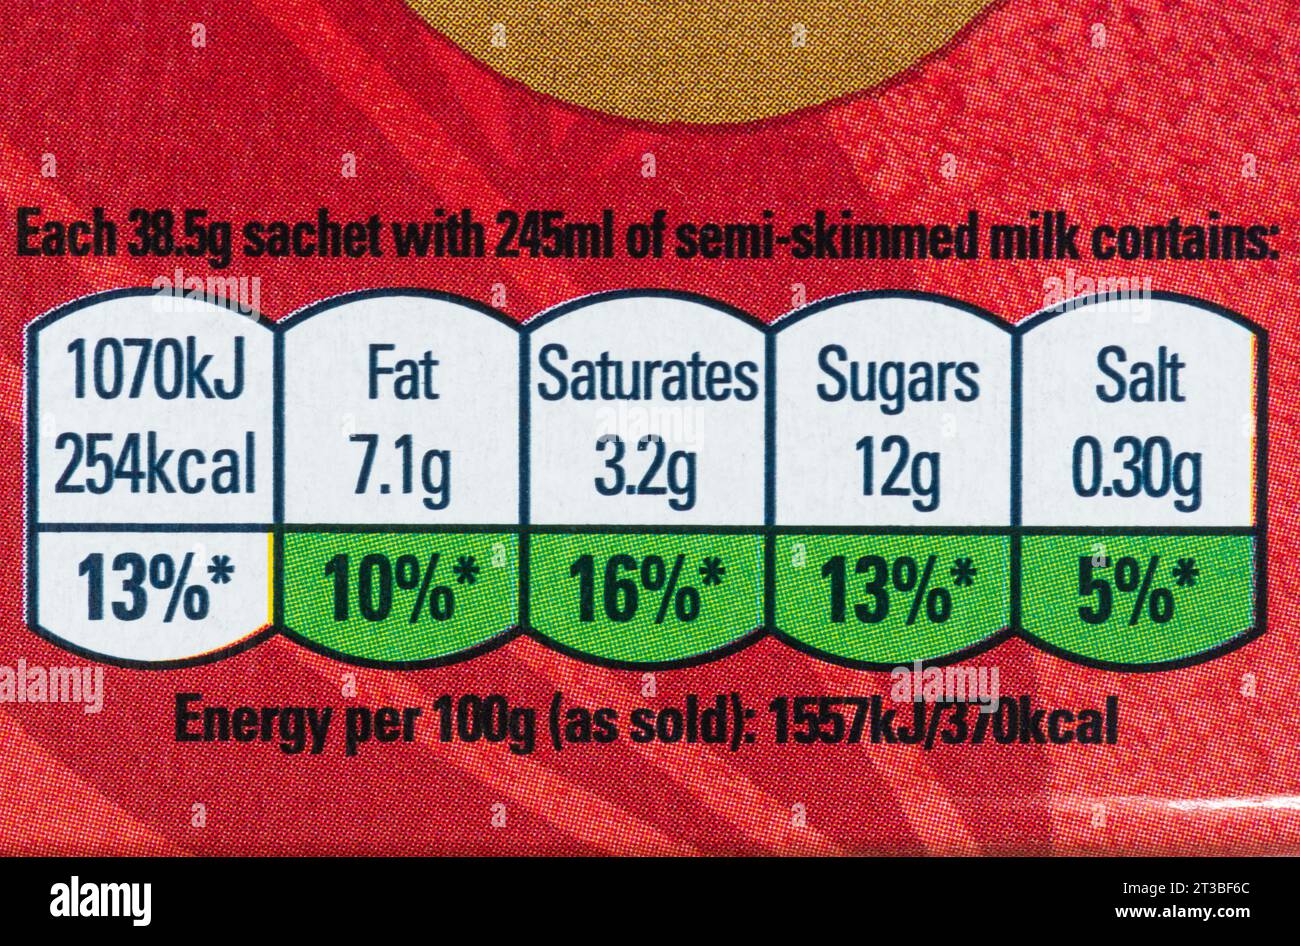 Food label giving nutritional information on pack of Quaker Oat So Simple porridge or oats sachets, England, UK. Healthy breakfast cereal food Stock Photo